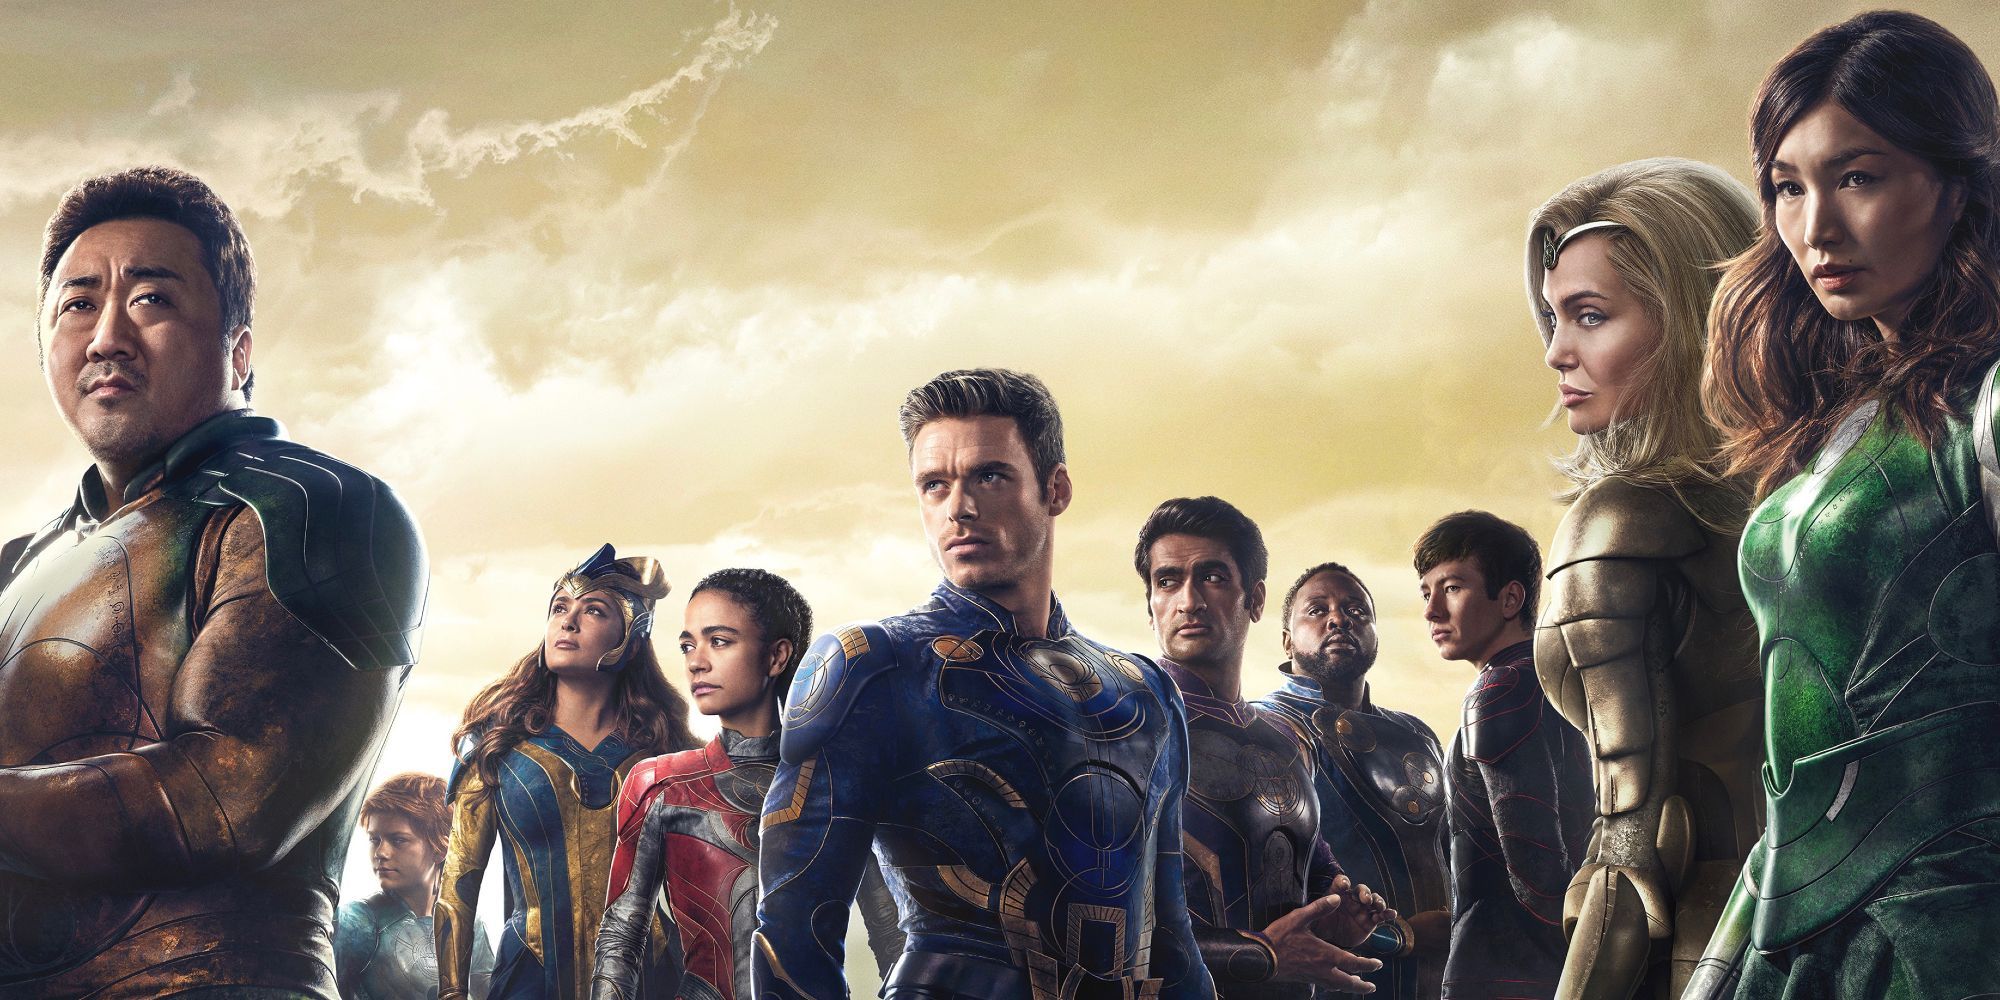 Eternals Rotten Tomatoes Score Drops To Lowest Of Any MCU Movie